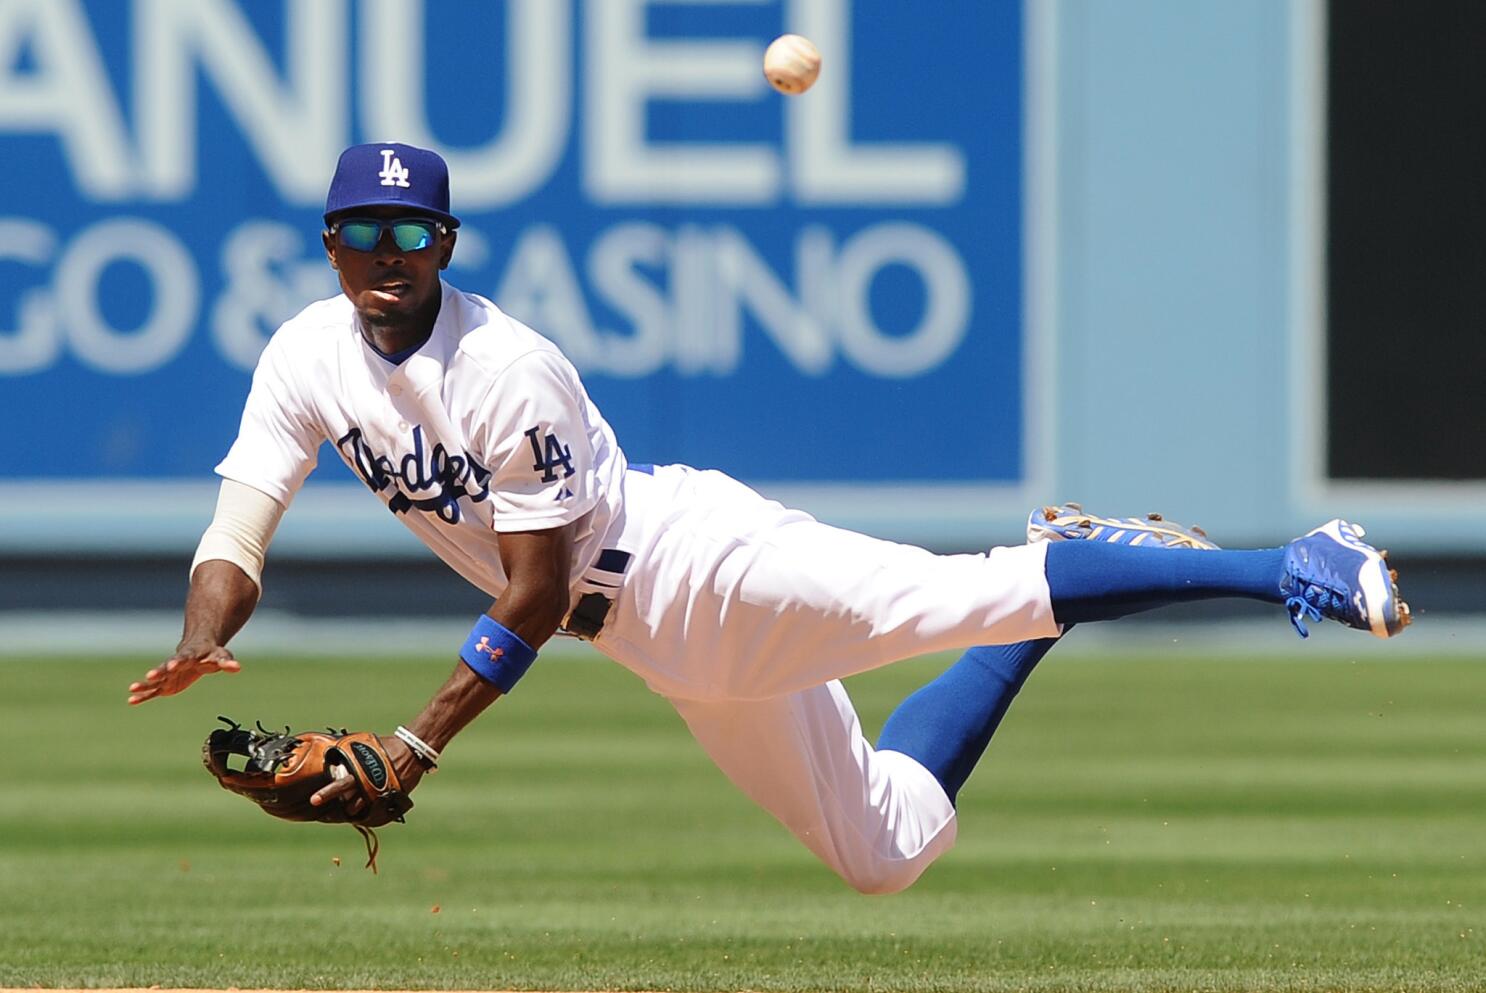 Los Angeles Dodgers are open to trading second baseman Dee Gordon